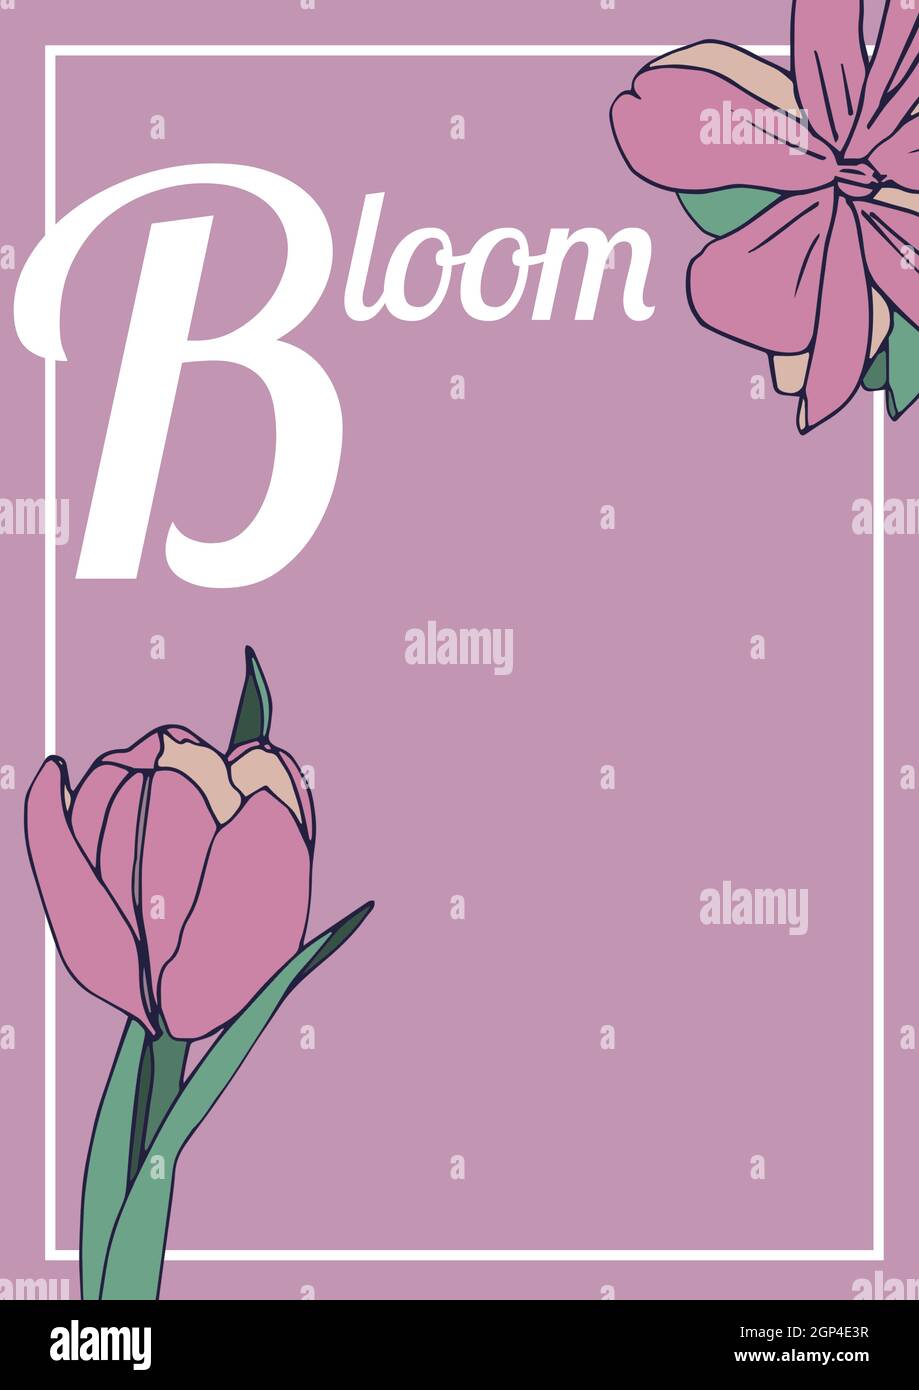 Composition of bloom text over flower icons on pink background Stock Photo